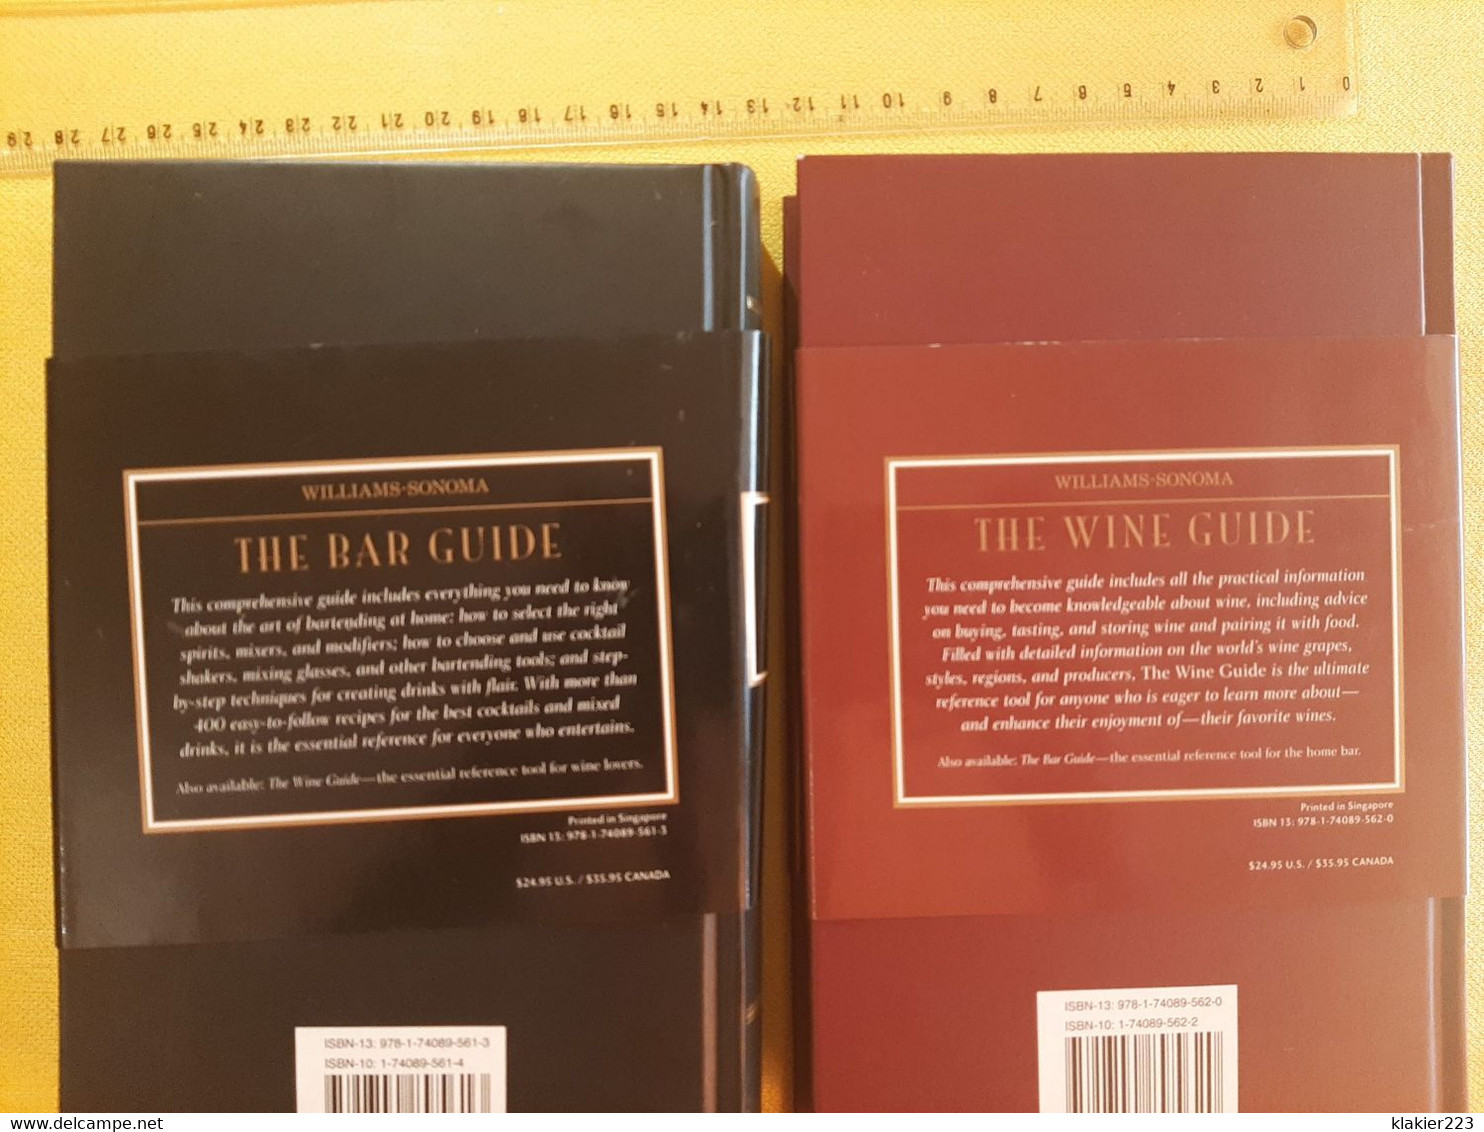 Williams-Sonoma - The Bar Guide / The Wine Guide - Européenne